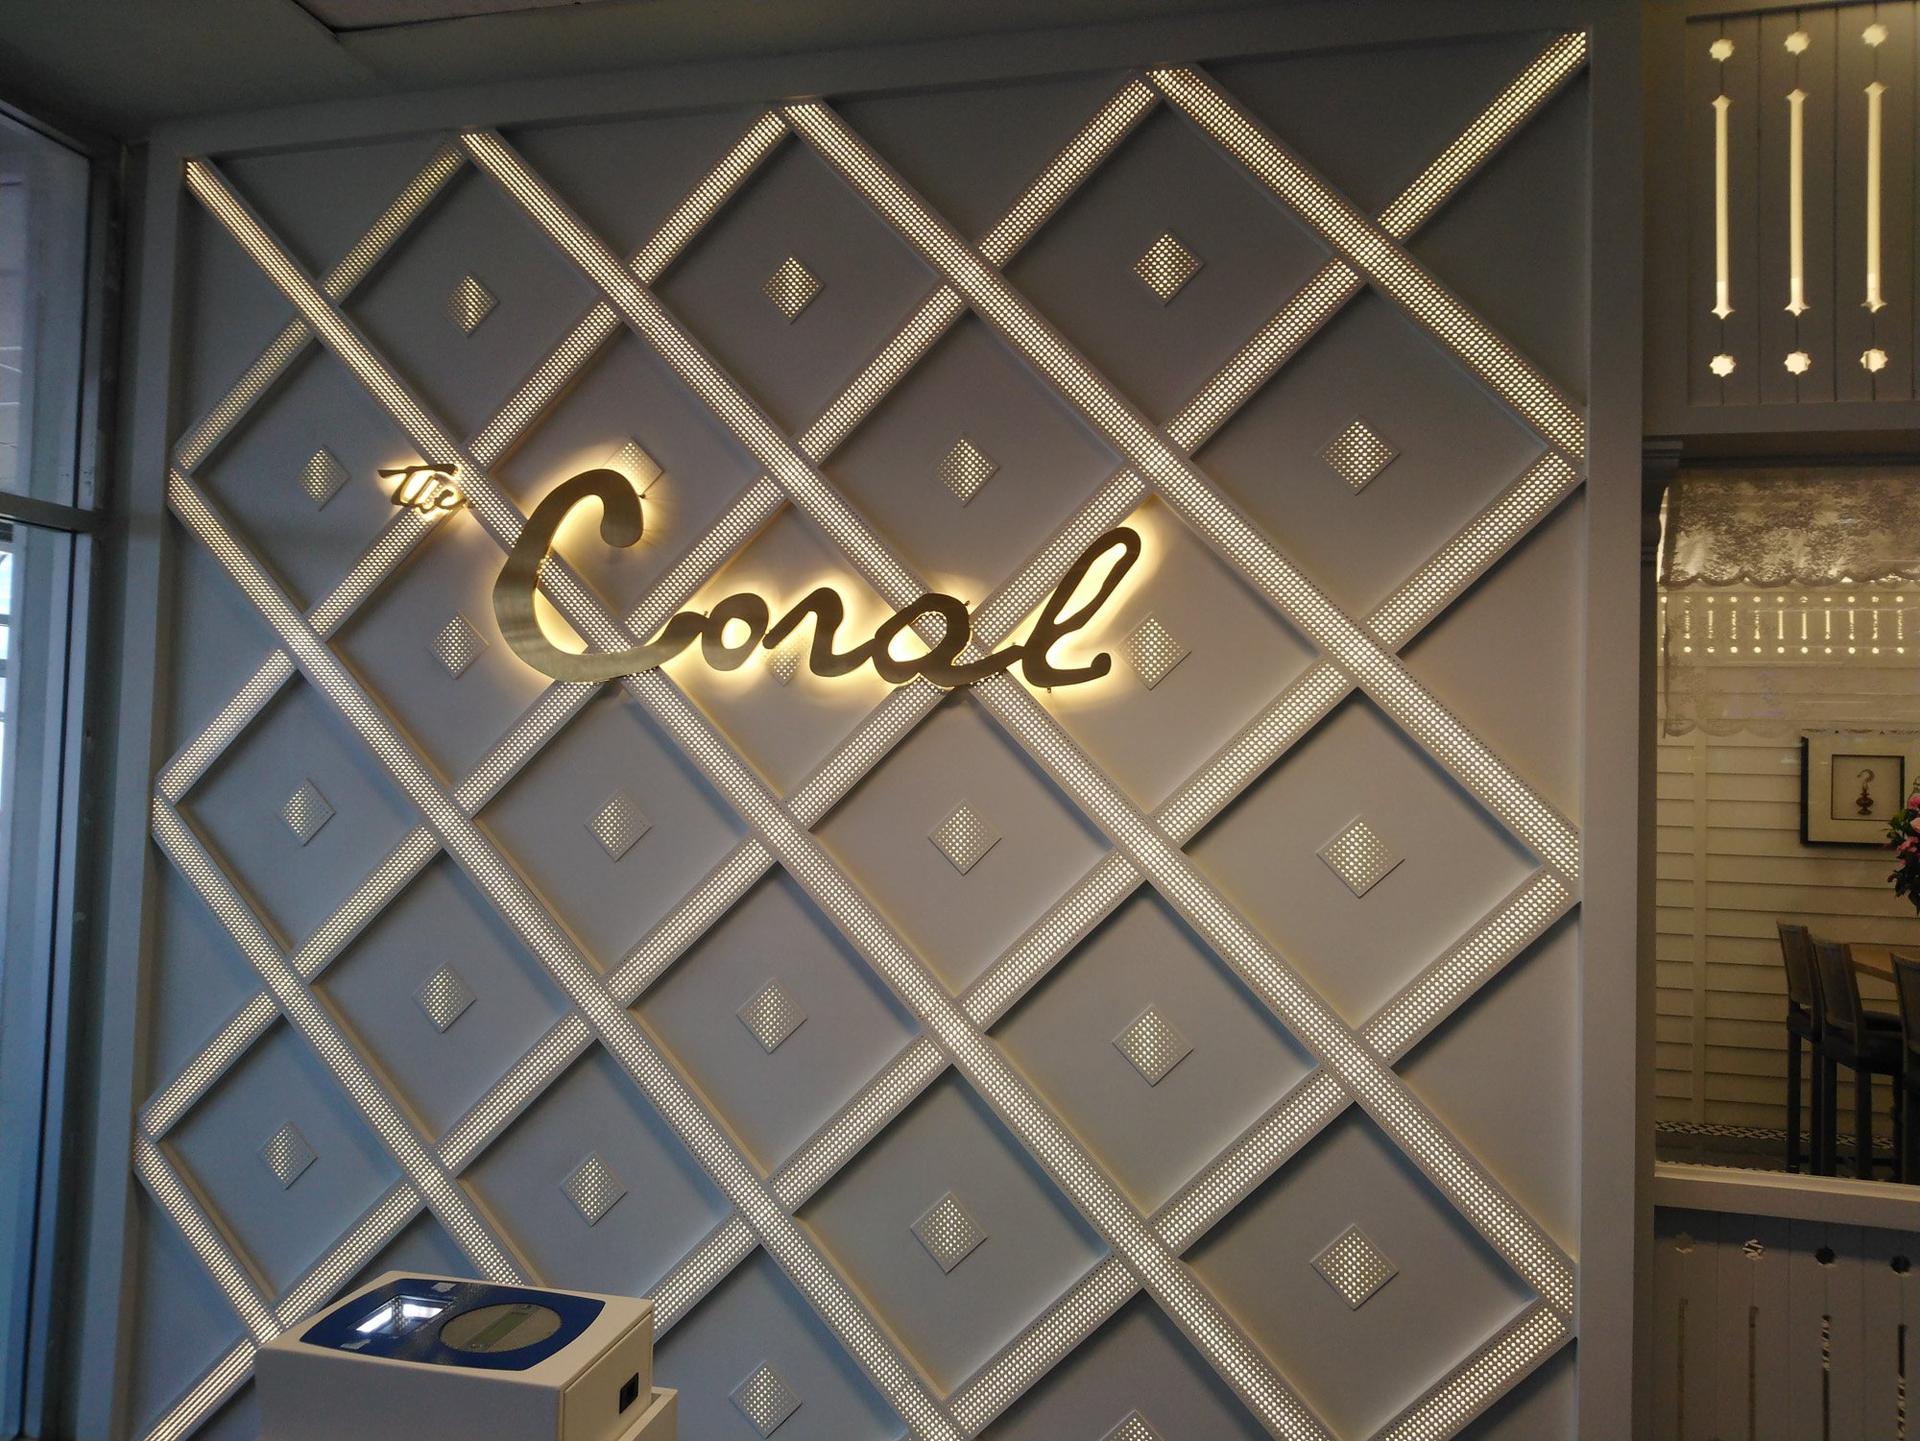 The Coral Executive Lounge image 26 of 30